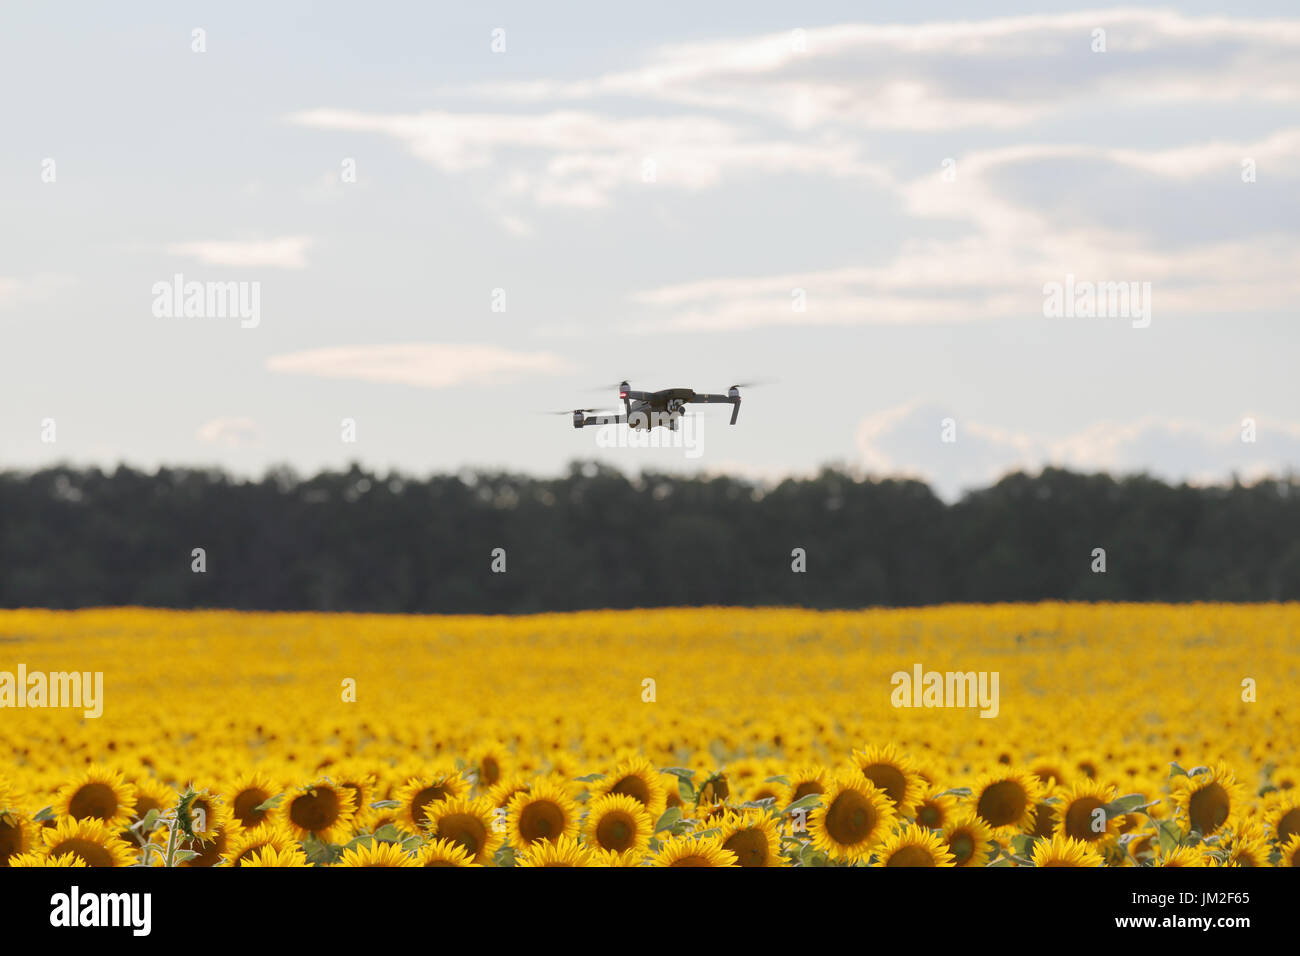 Drone hovering over sunflower field in clear blue sky partly clouded. Stock Photo